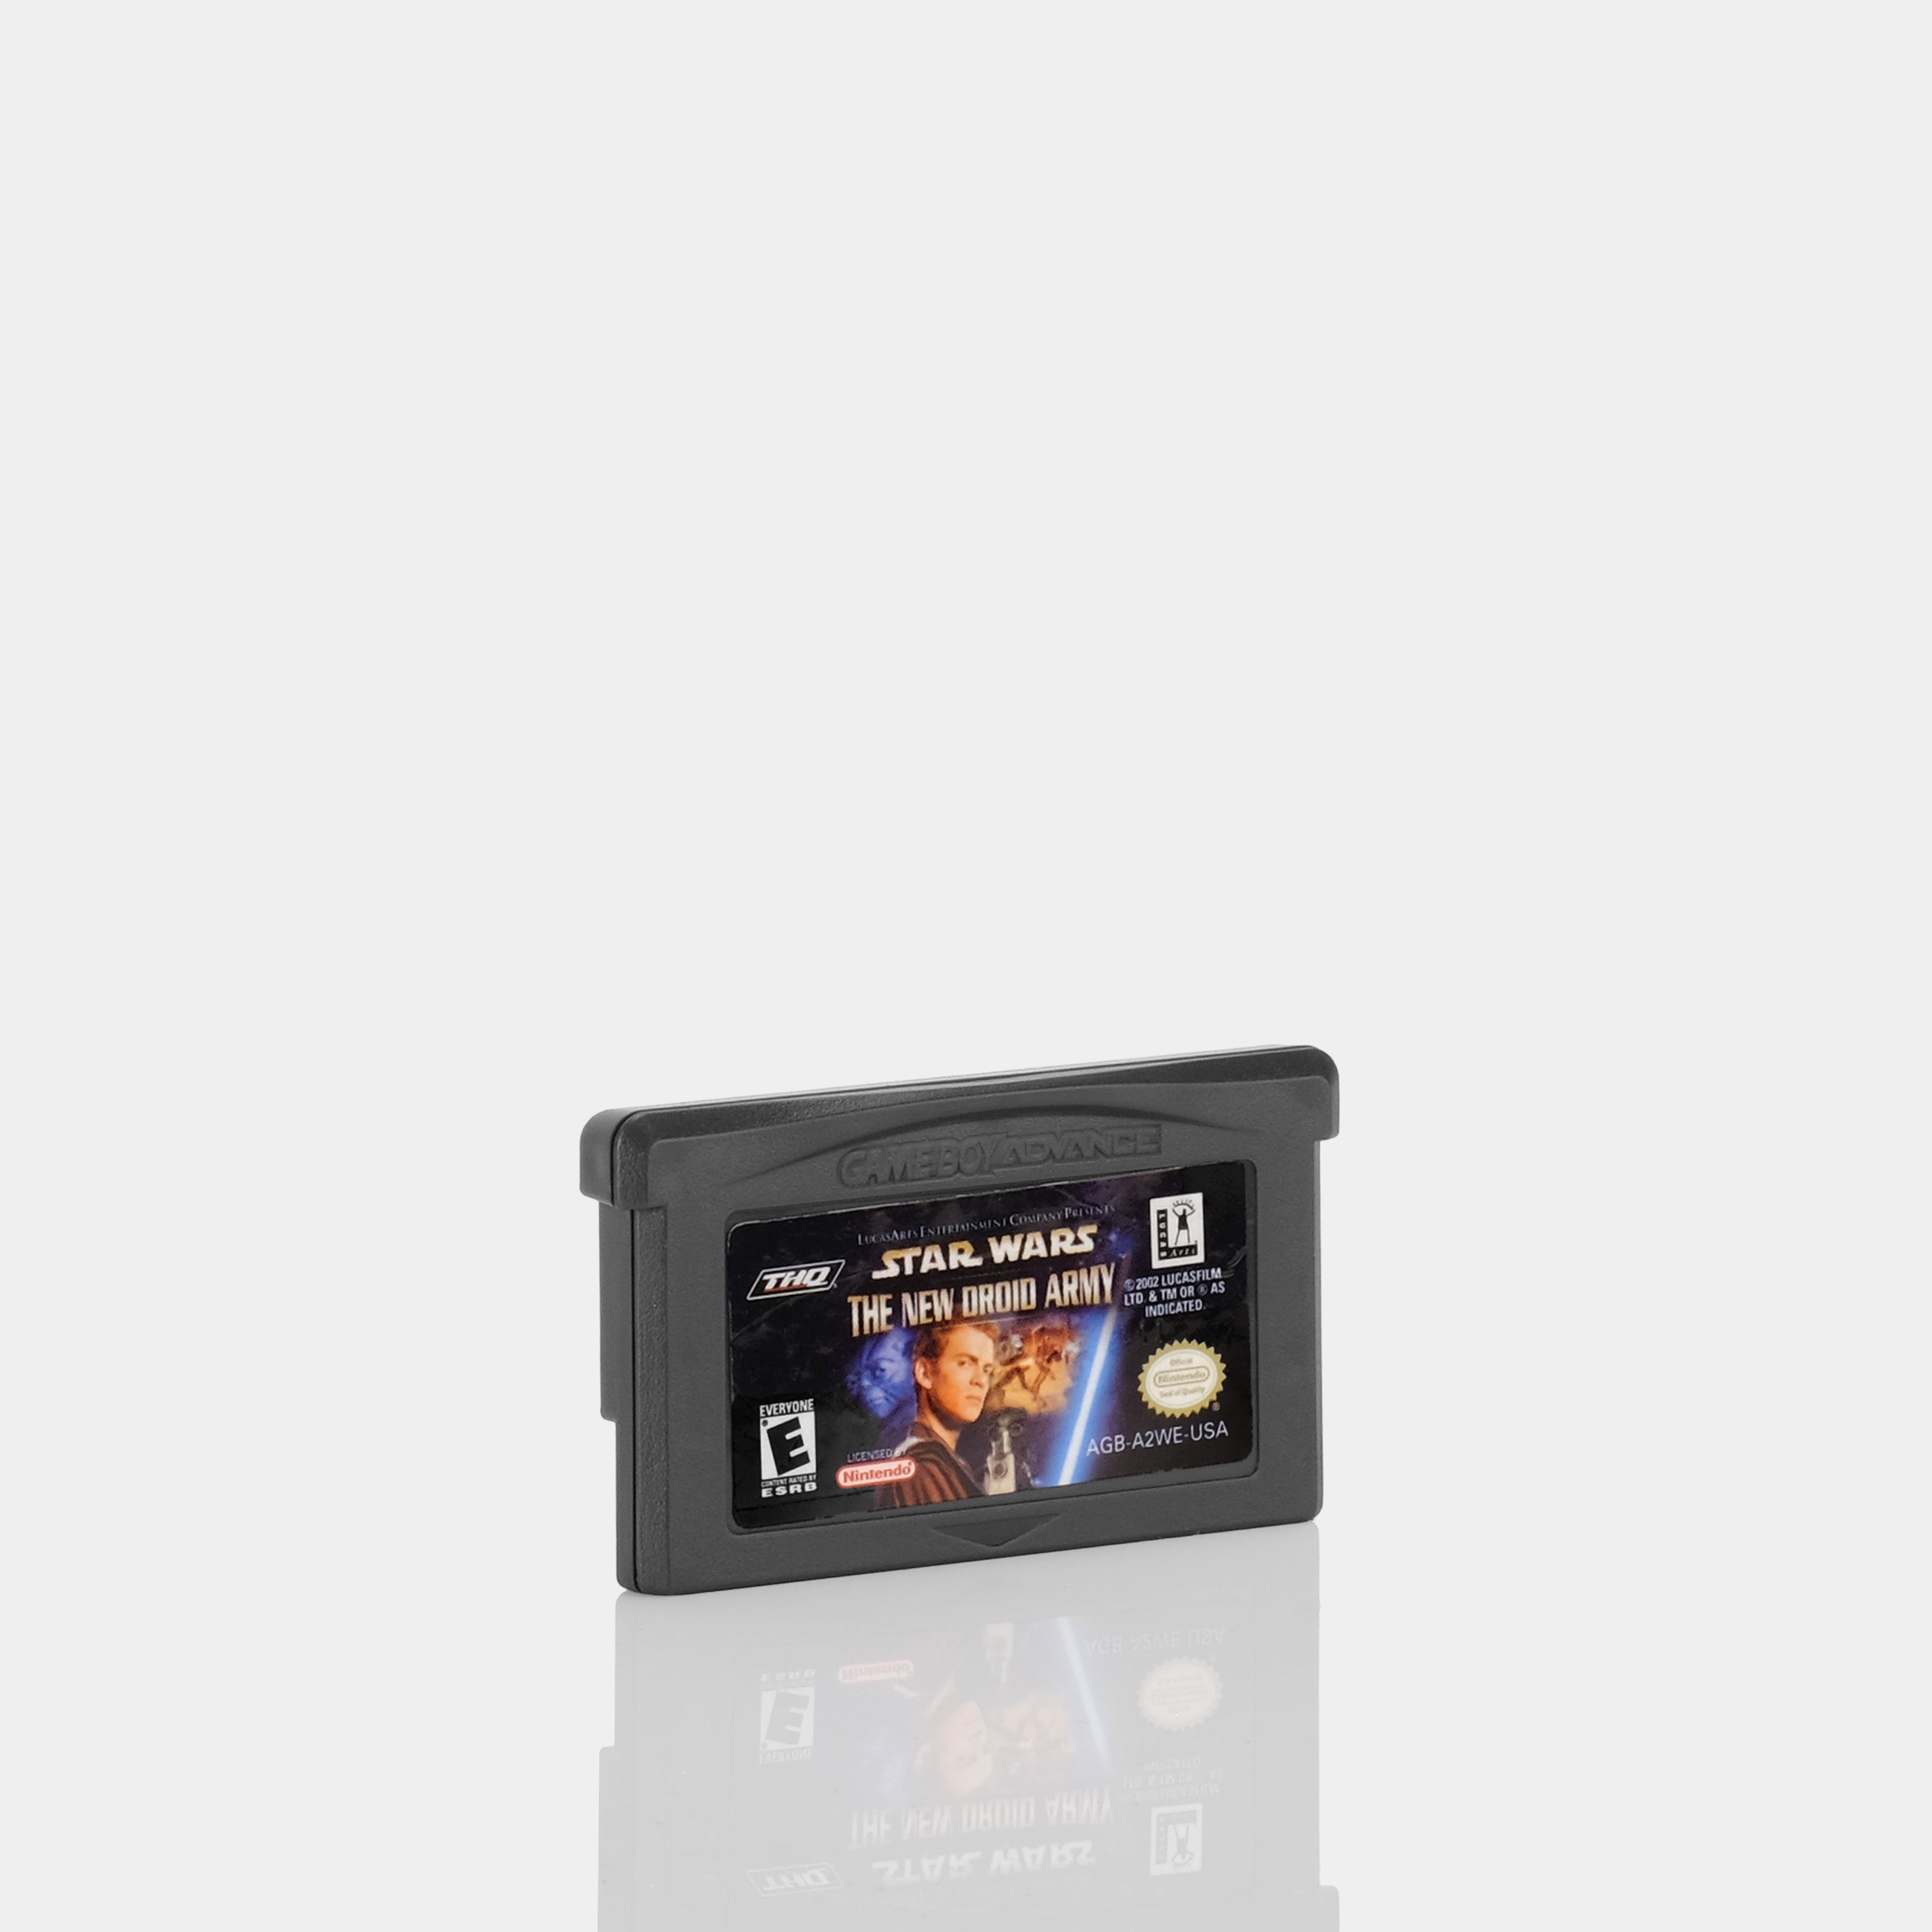 Star Wars Episode III: Revenge of the Sith Game Boy Advance Game